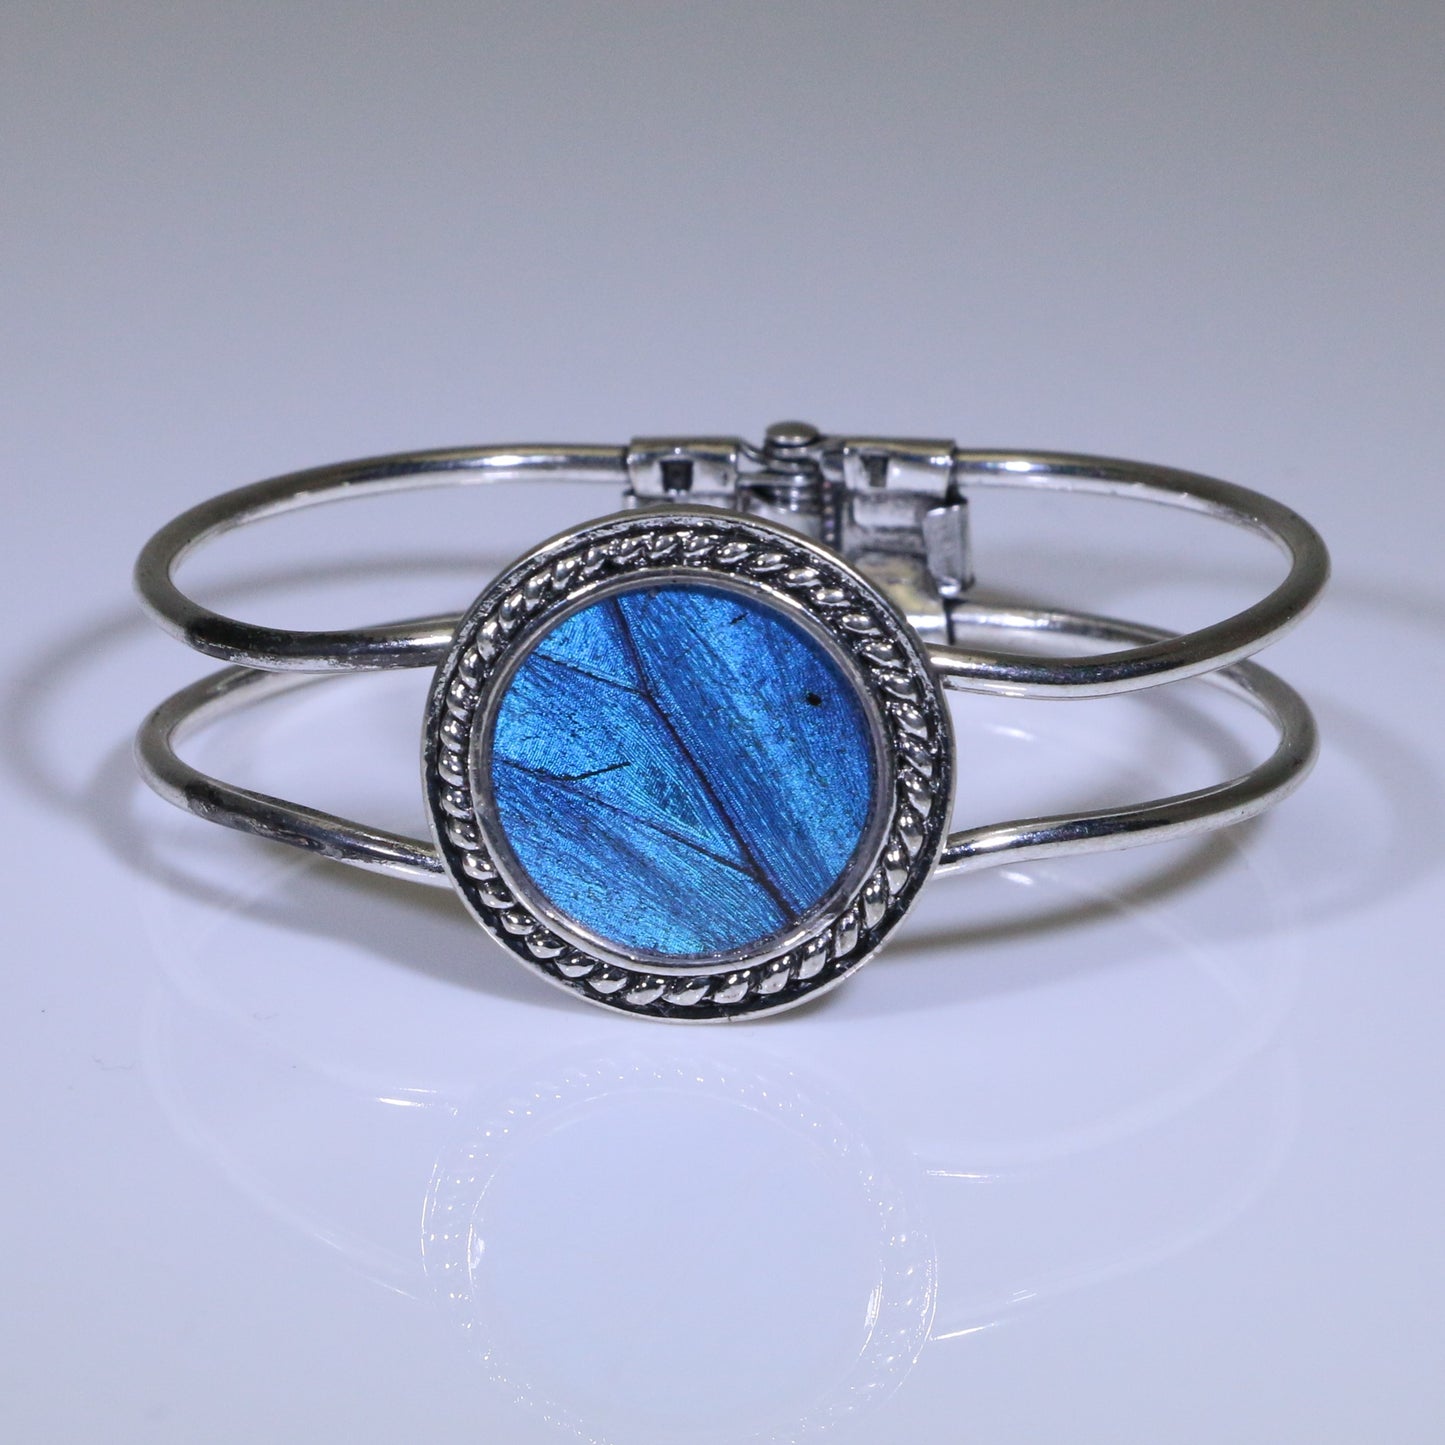 53001 - Real Butterfly Wing Jewelry - Bracelet Collection - Blue Morpho